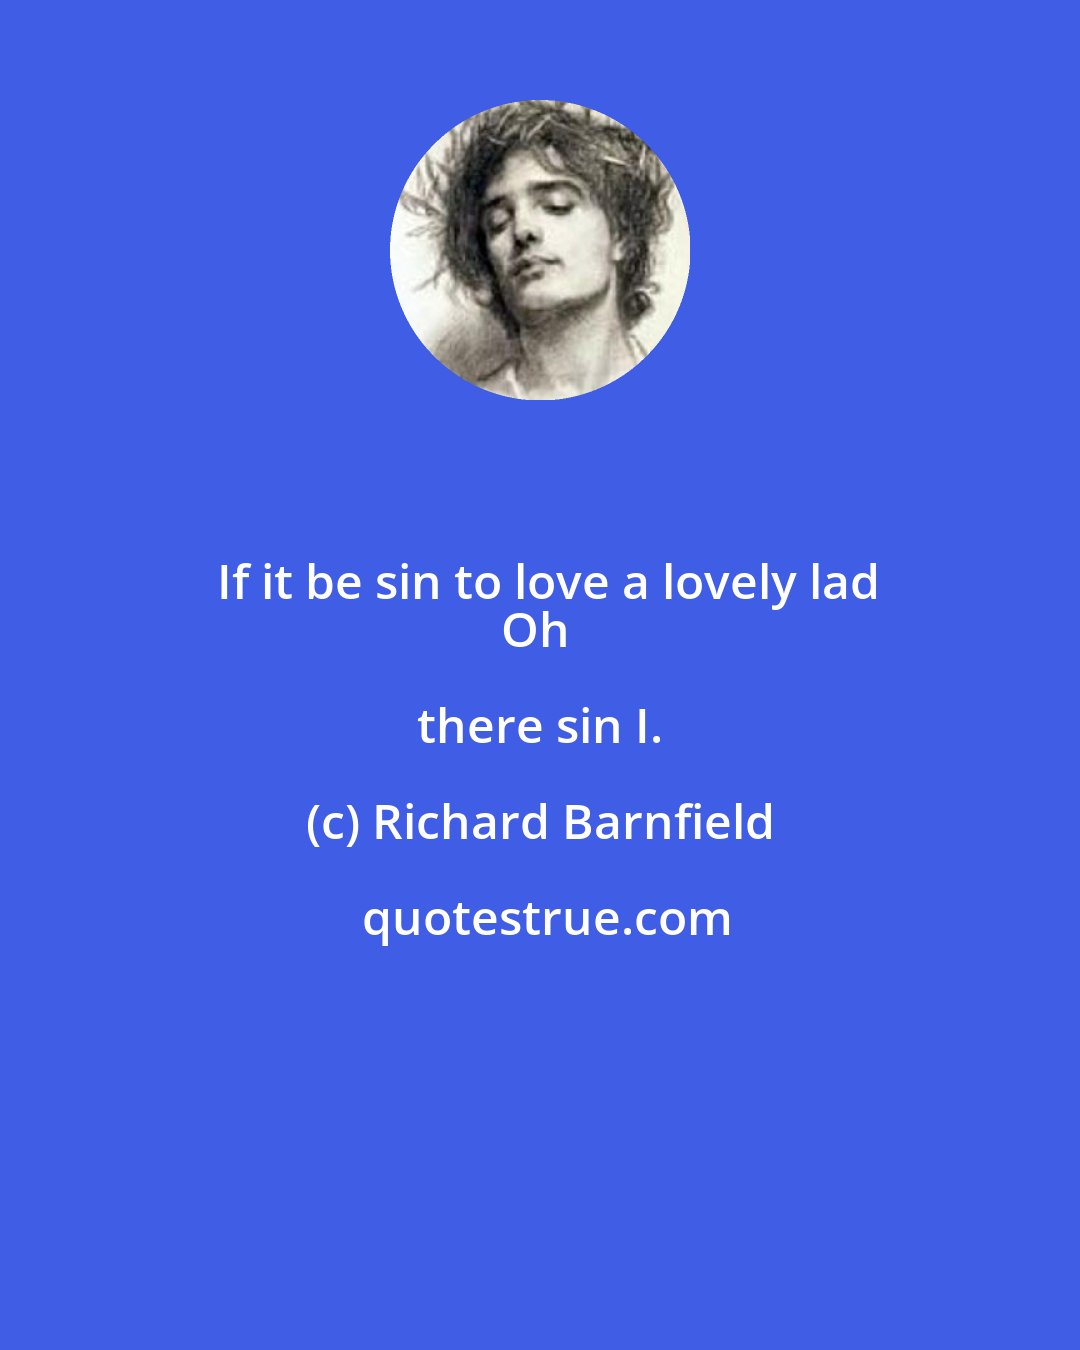 Richard Barnfield: If it be sin to love a lovely lad
Oh there sin I.